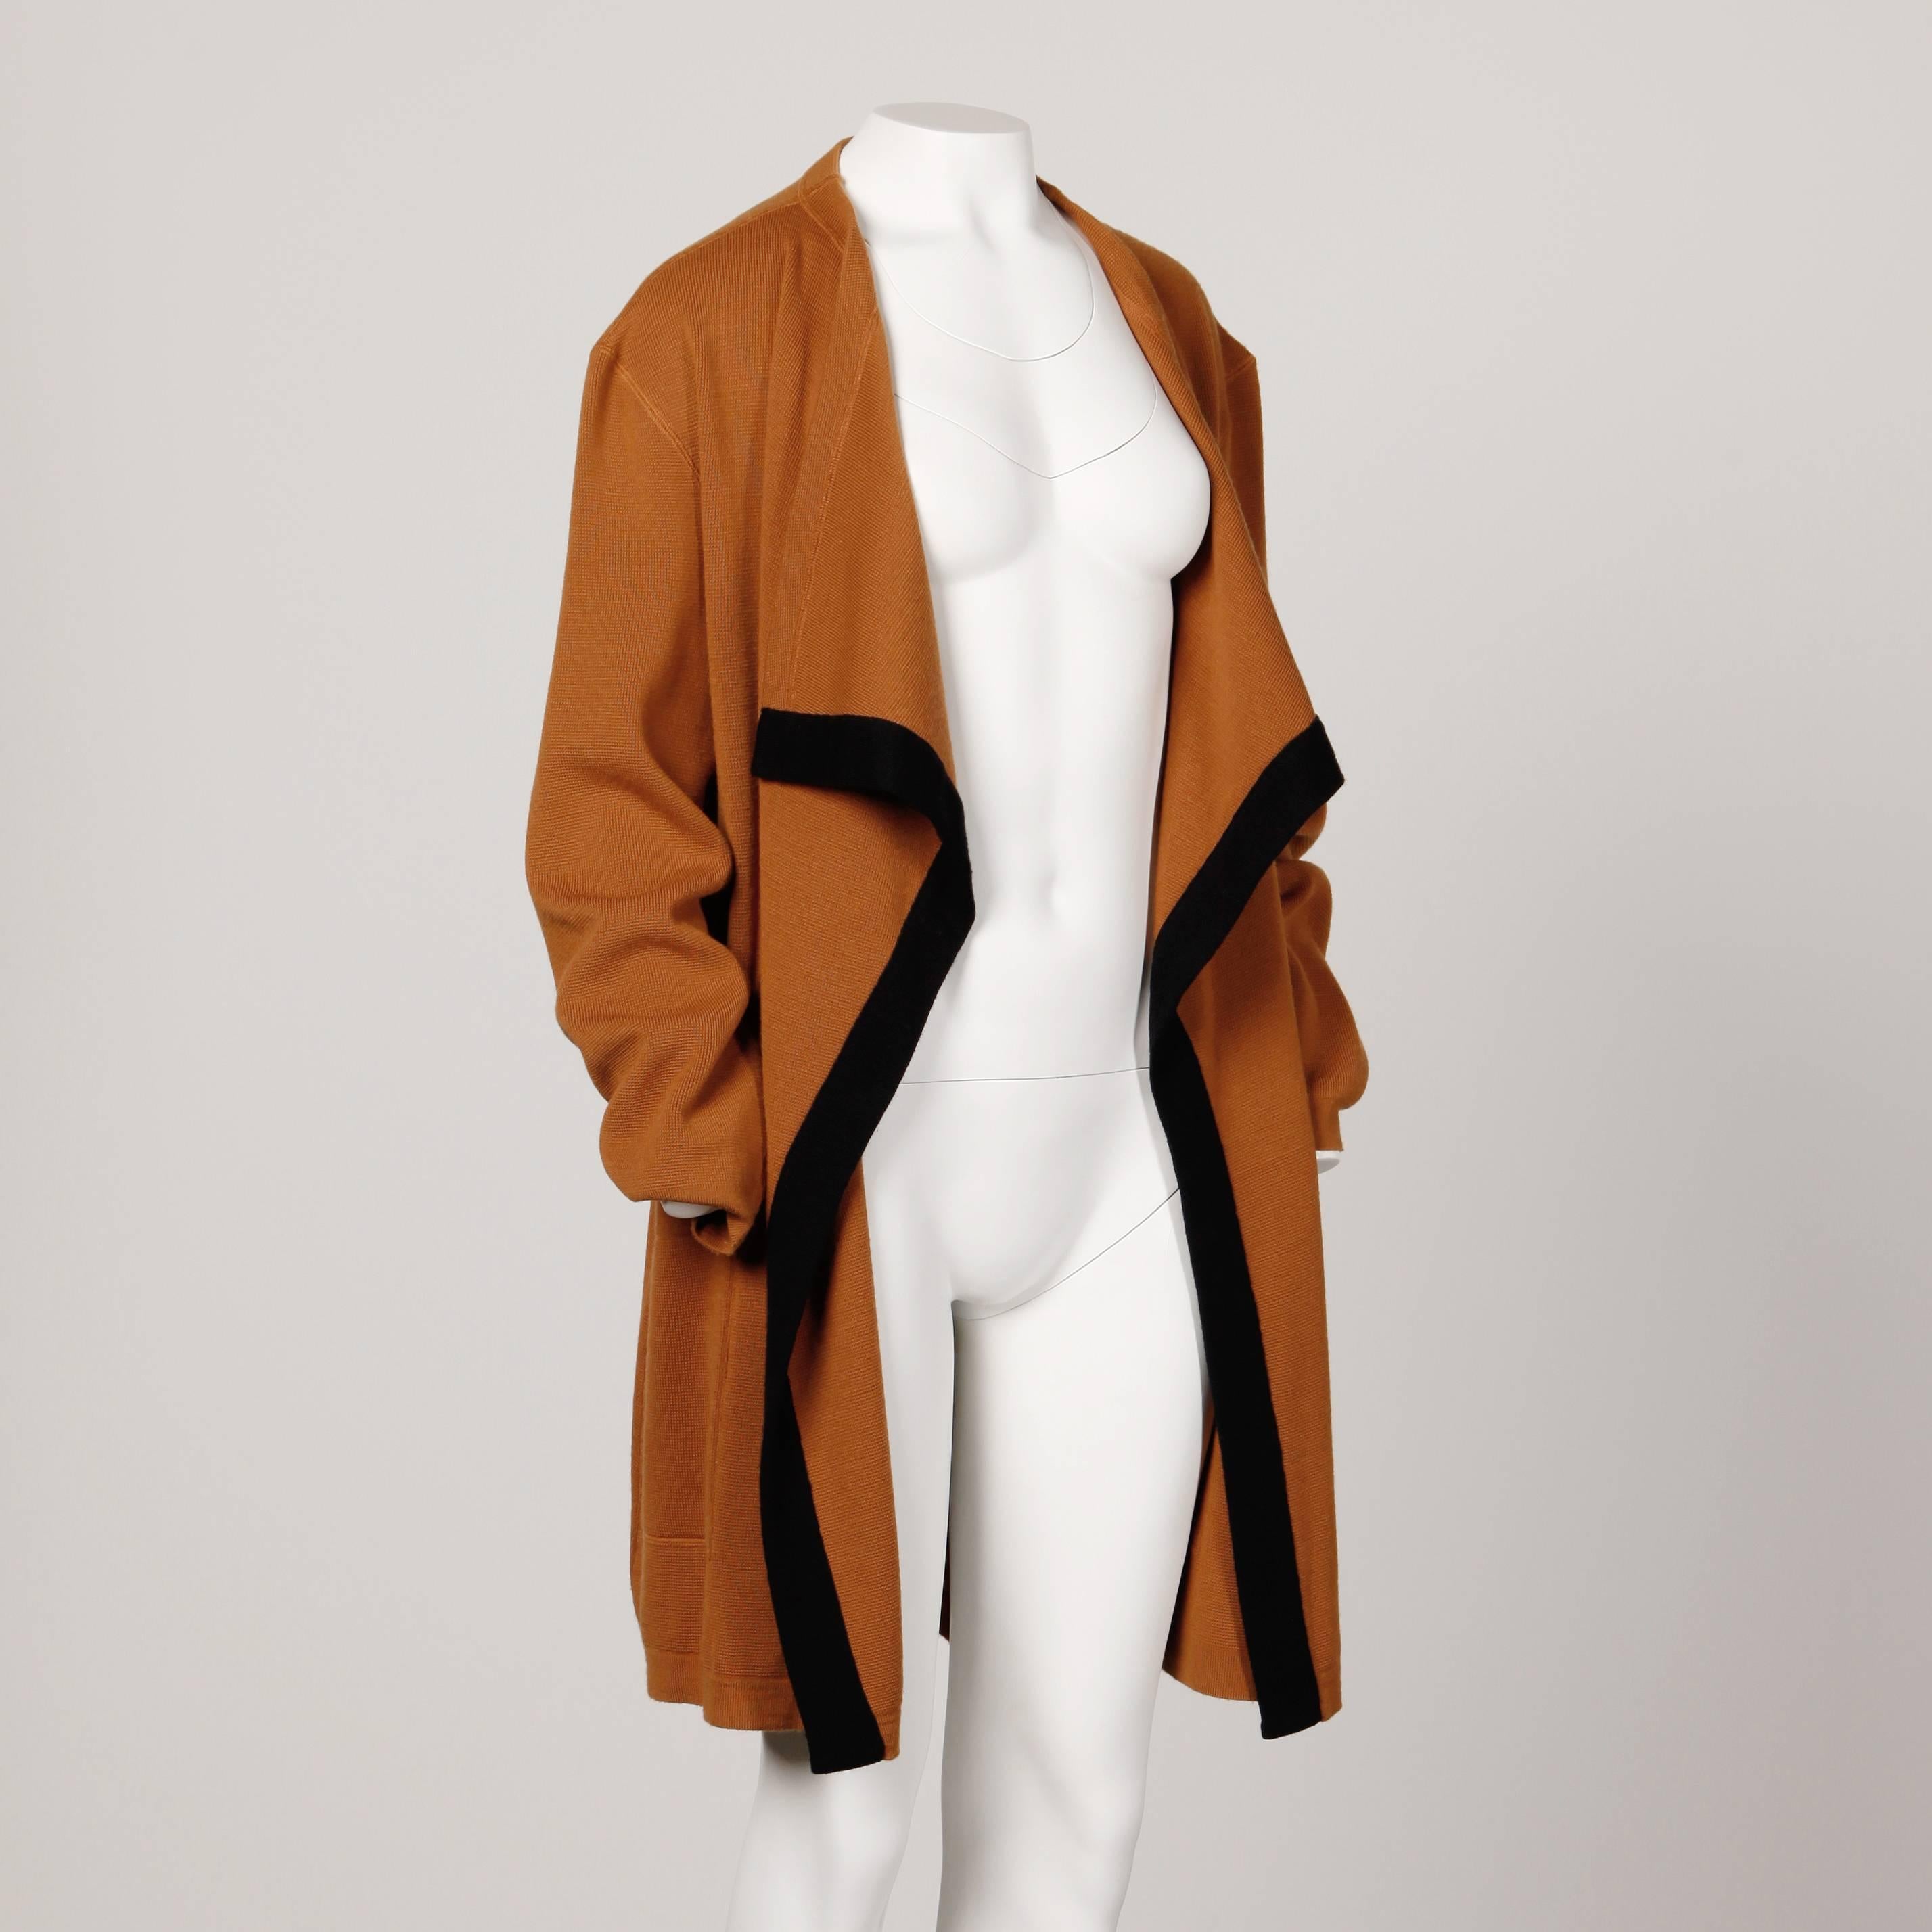 Oversized vintage two-tone wool knit cardigan sweater coat by Courreges. Avant garde shape with draped front. A great layering piece!

Details: 

Unlined
Front Box Pockets
Estimated Size: Free XS-XL
Color: Brown/ Black
Fabric: Wool